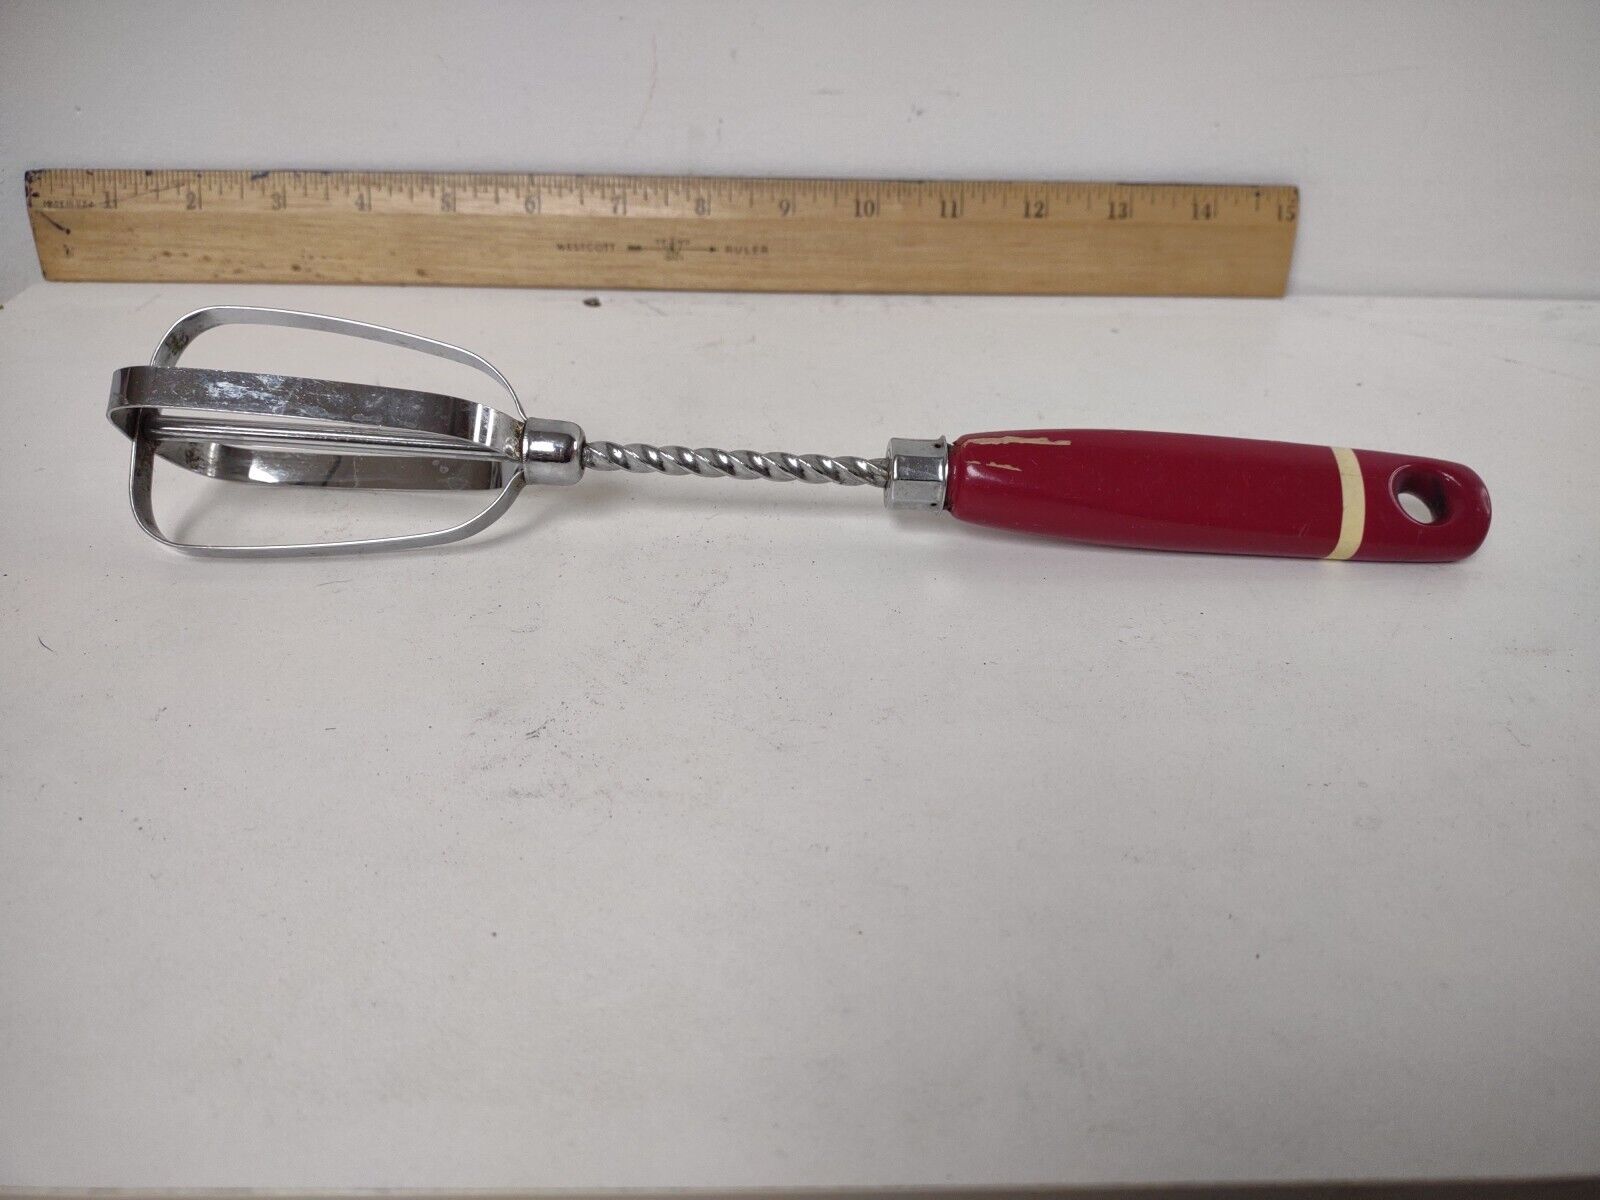 VINTAGE UNIQUE RED WOOD HANDLED PUSH SPRING ACTION MIXER EGG BEATER WHISK